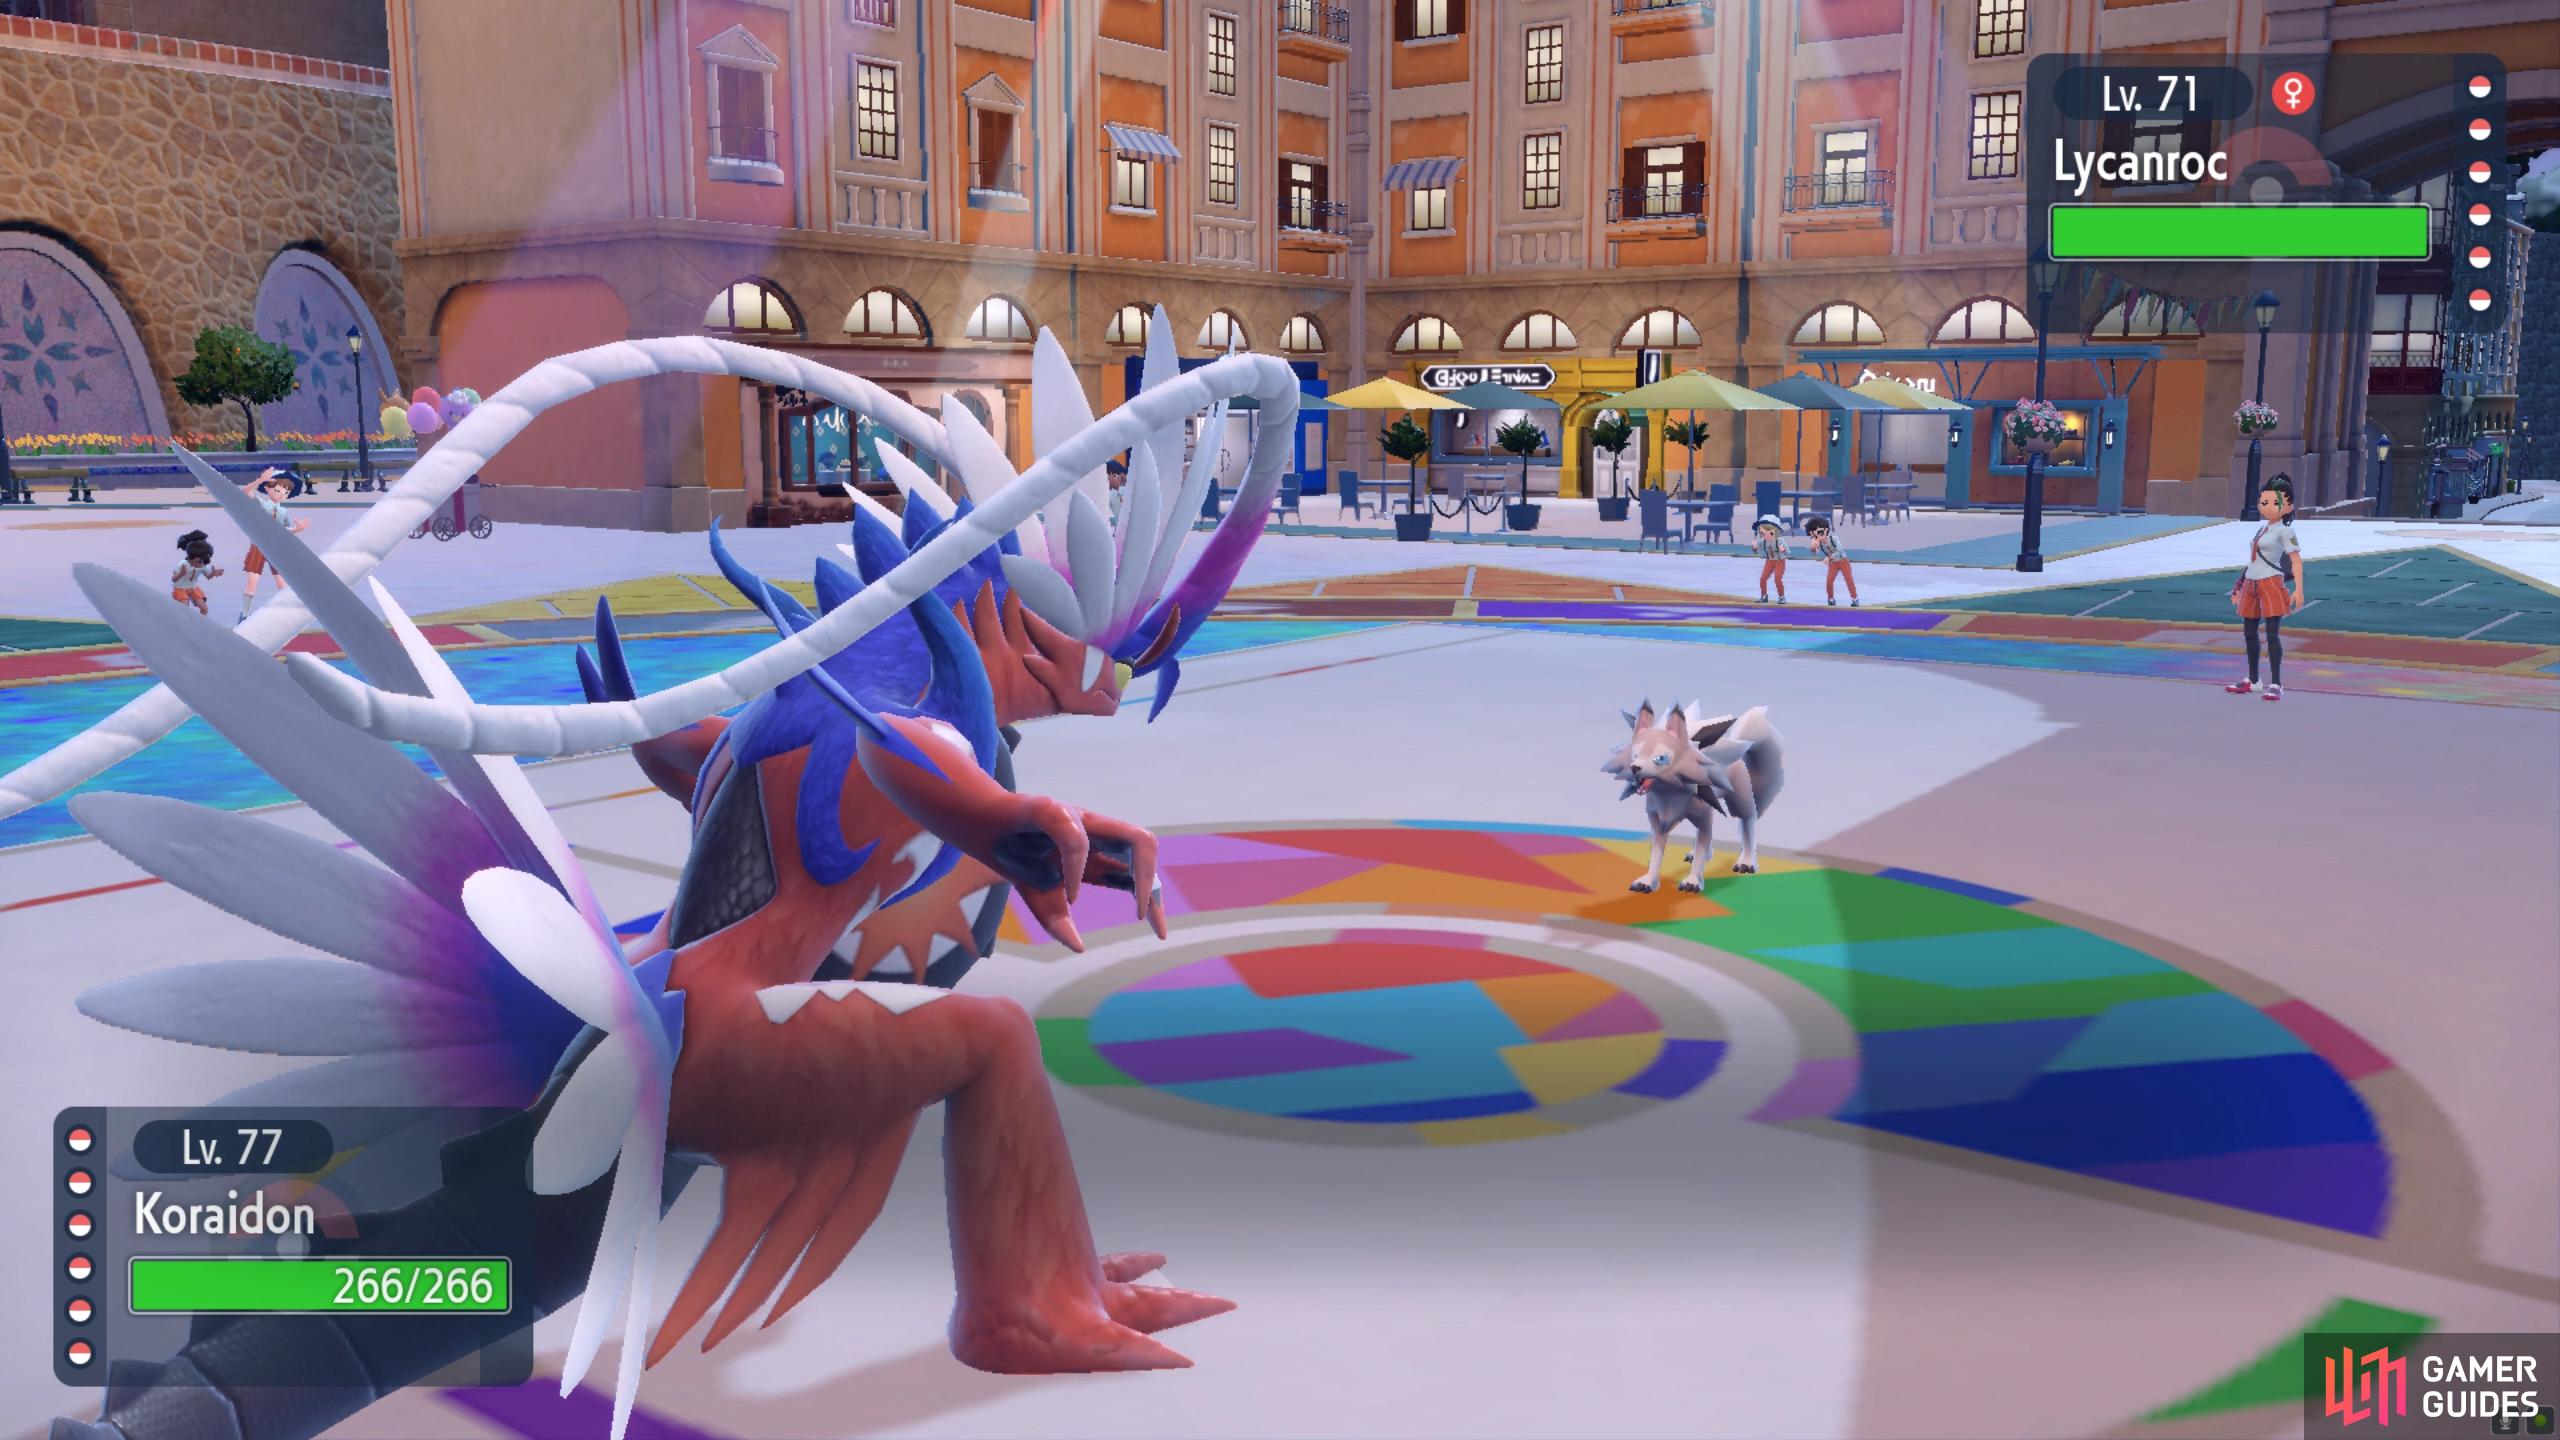 Fighting a Legendary Pokémon is sure to make Nemona excited.